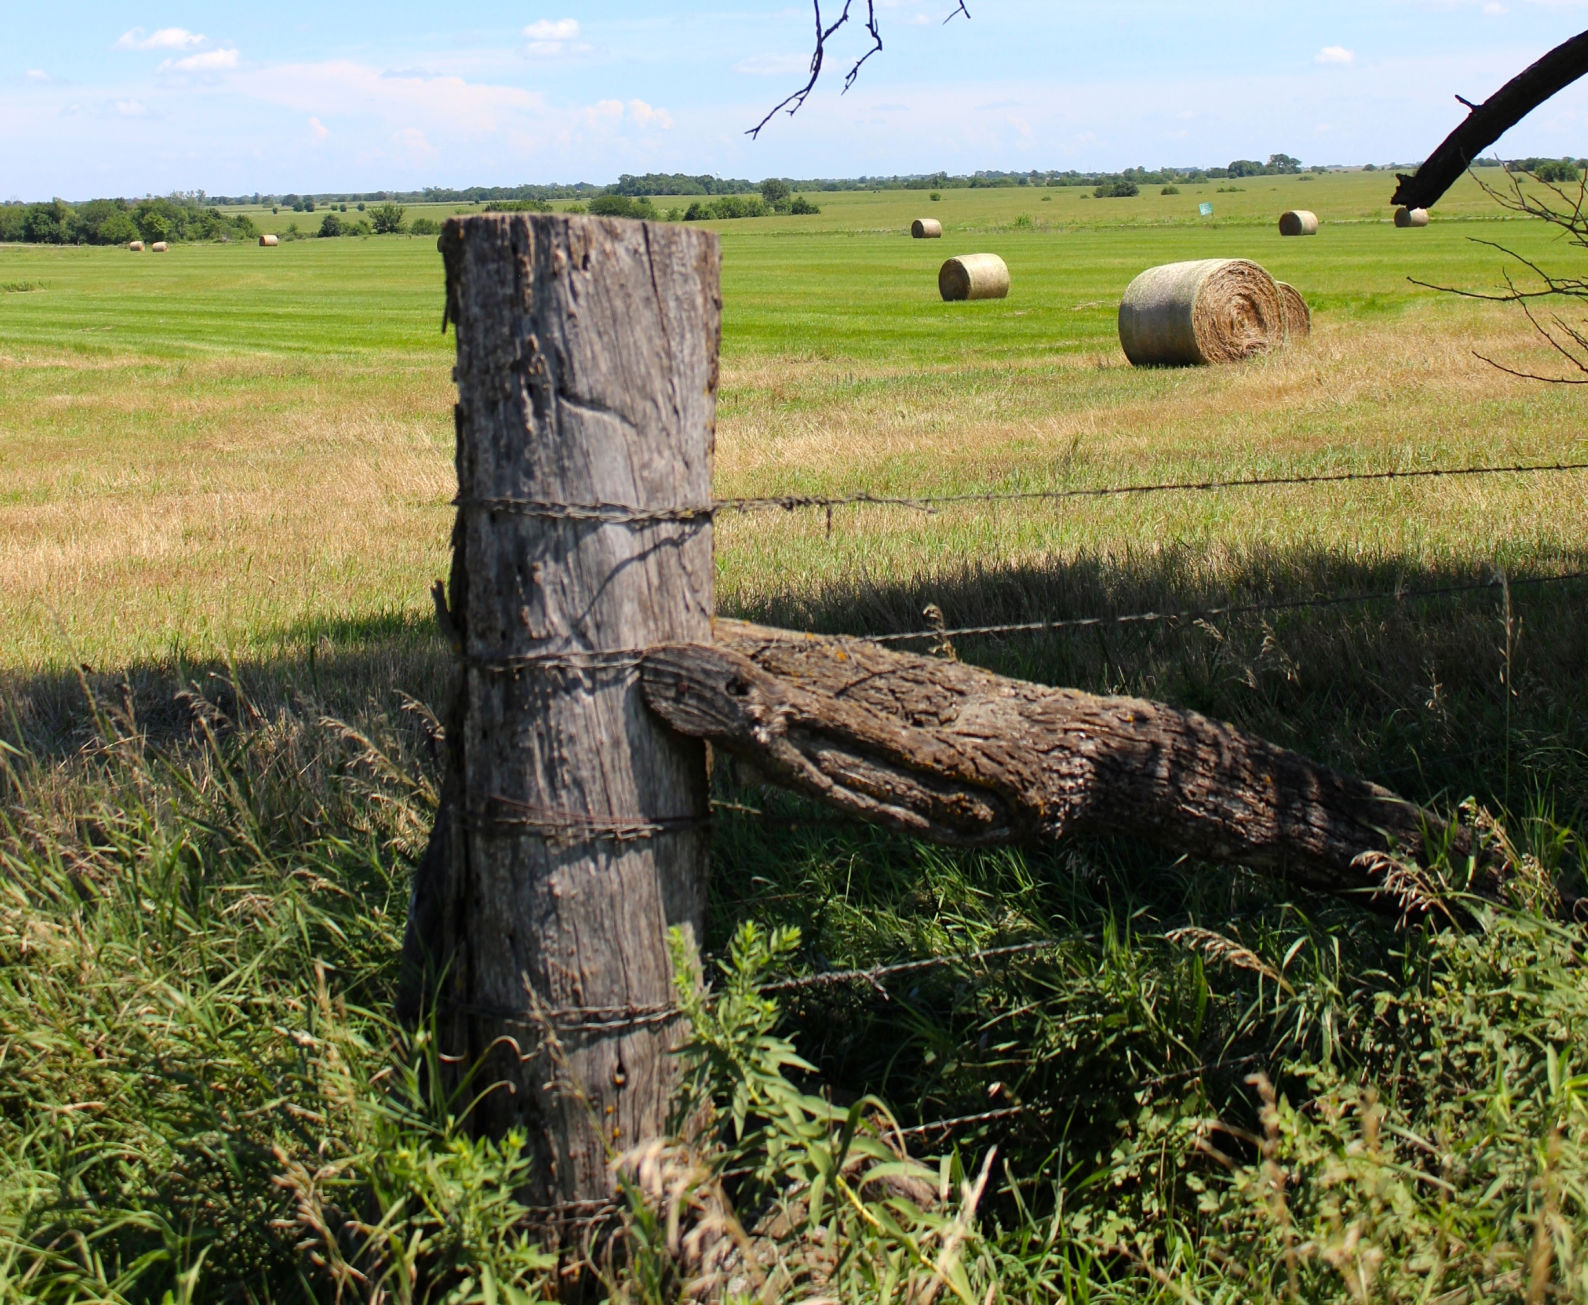 Talk to your neighbor before repairing or replacing a partition fence. Make sure you both understand your rights and responsibilities. The Kansas Livestock Association has fence law packets that can help its members with these conversations. (Journal photo by Doug Rich.)